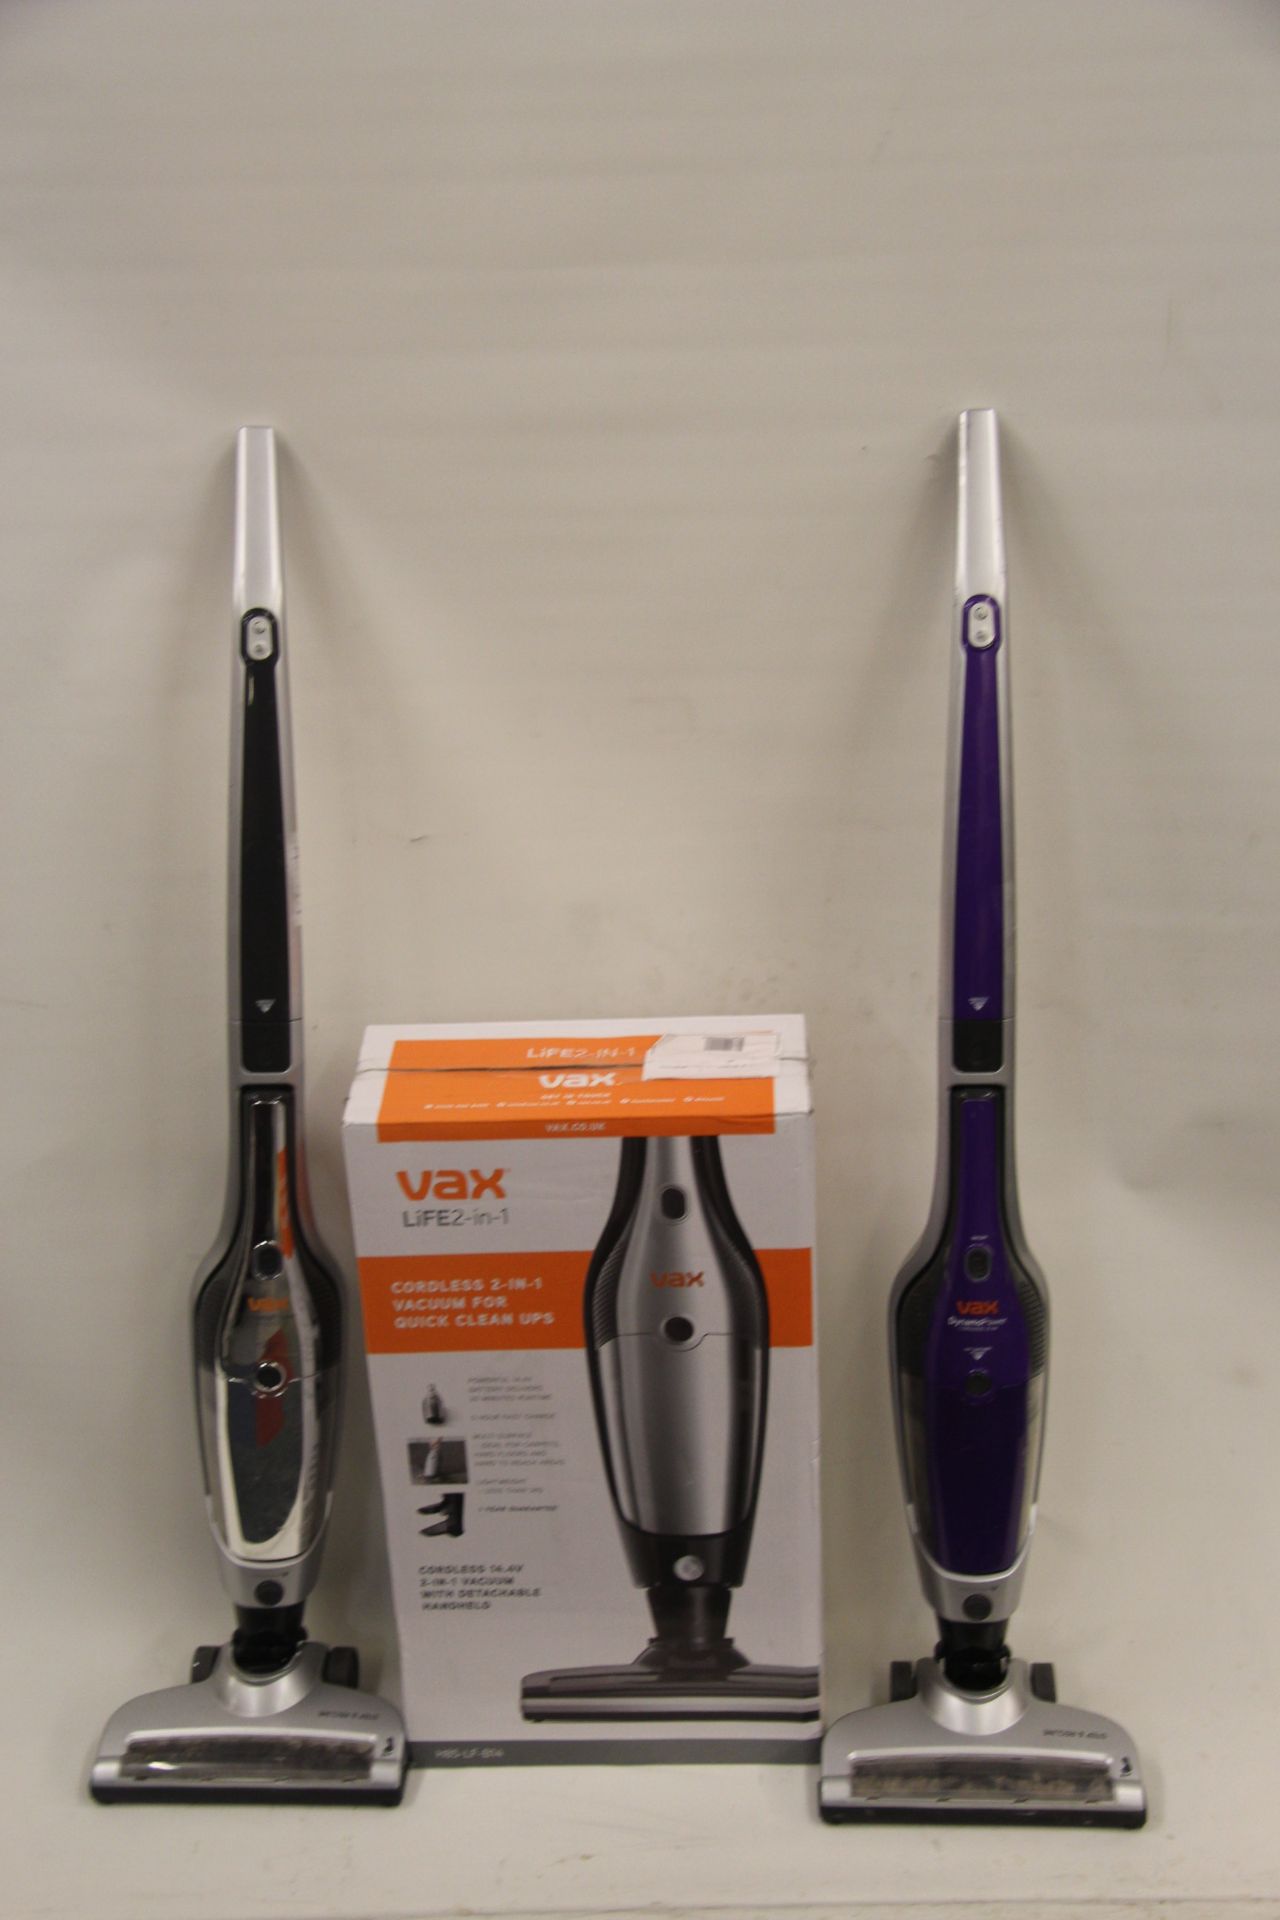 V *TRADE QTY* Grade U A Lot of Three Vax 2in1 Cordless Vacuum Cleaning - Detachable handheld - Image 2 of 2